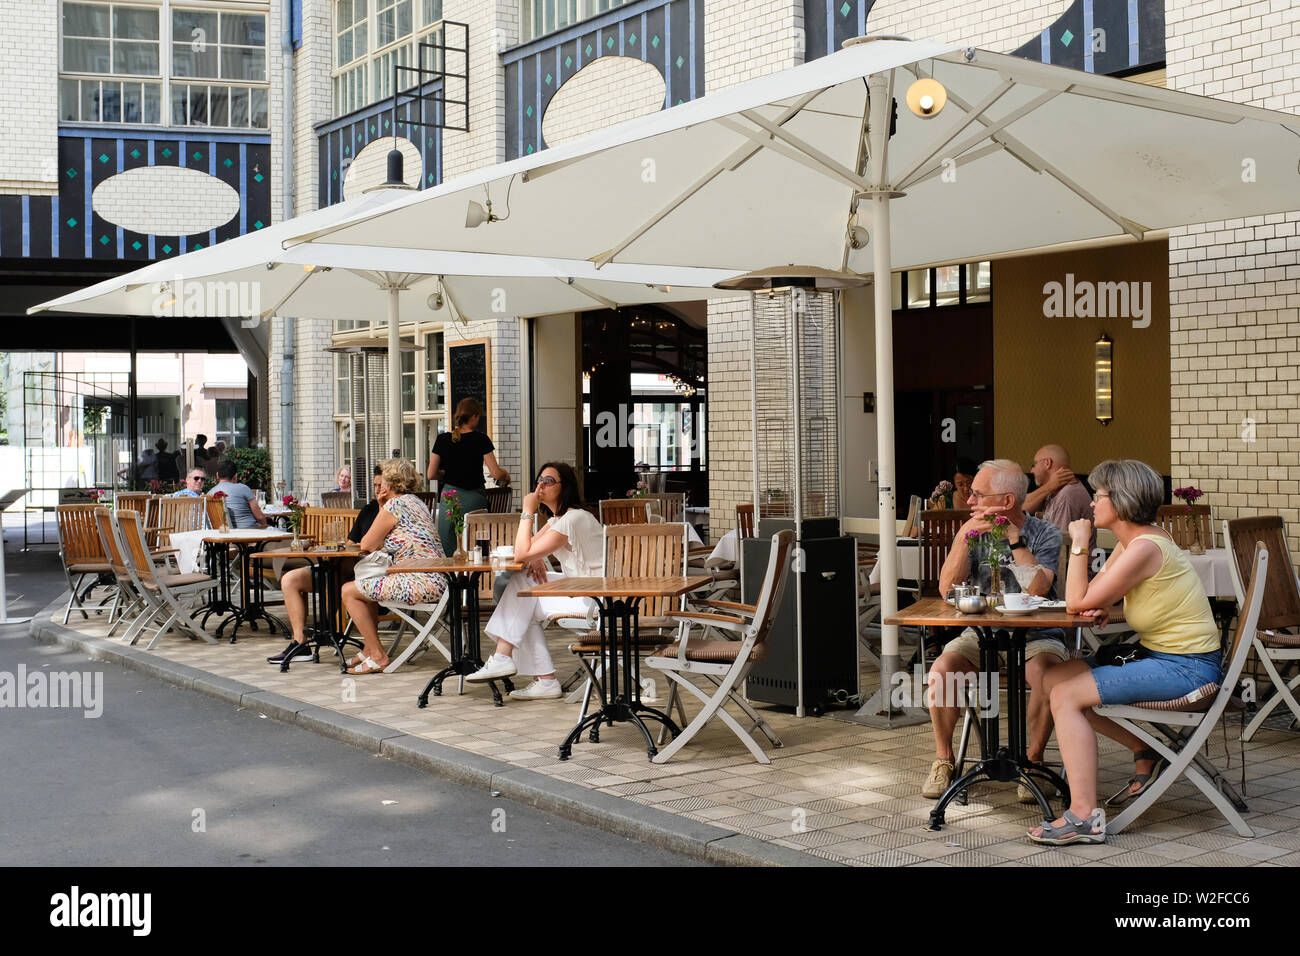 Terrace of a restaurant Central Berlin Stock Photo